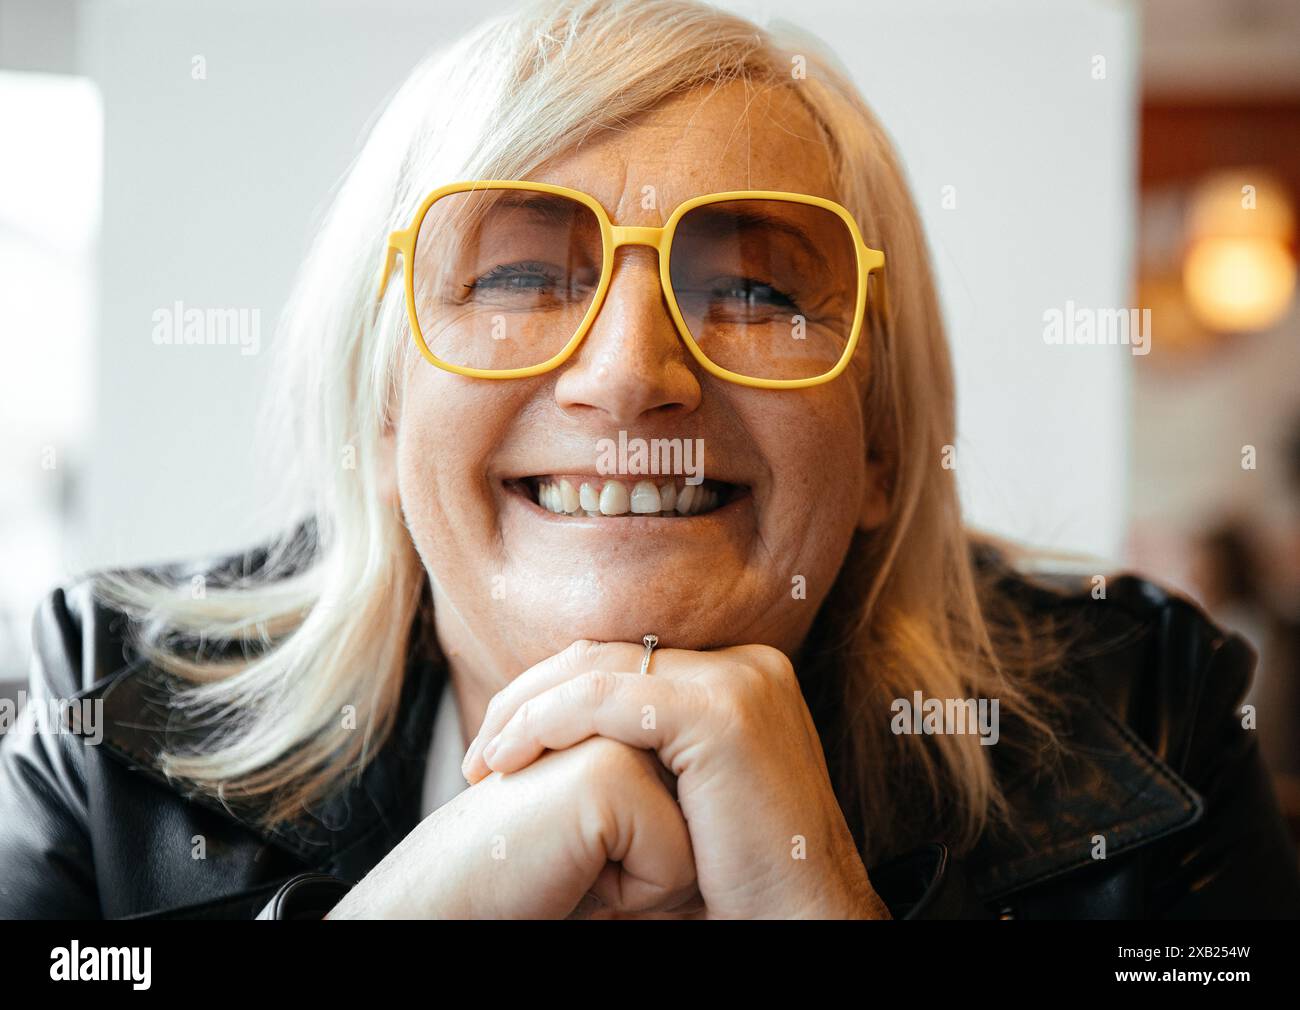 Smiling older woman with yellow glasses and blonde hair Stock Photo